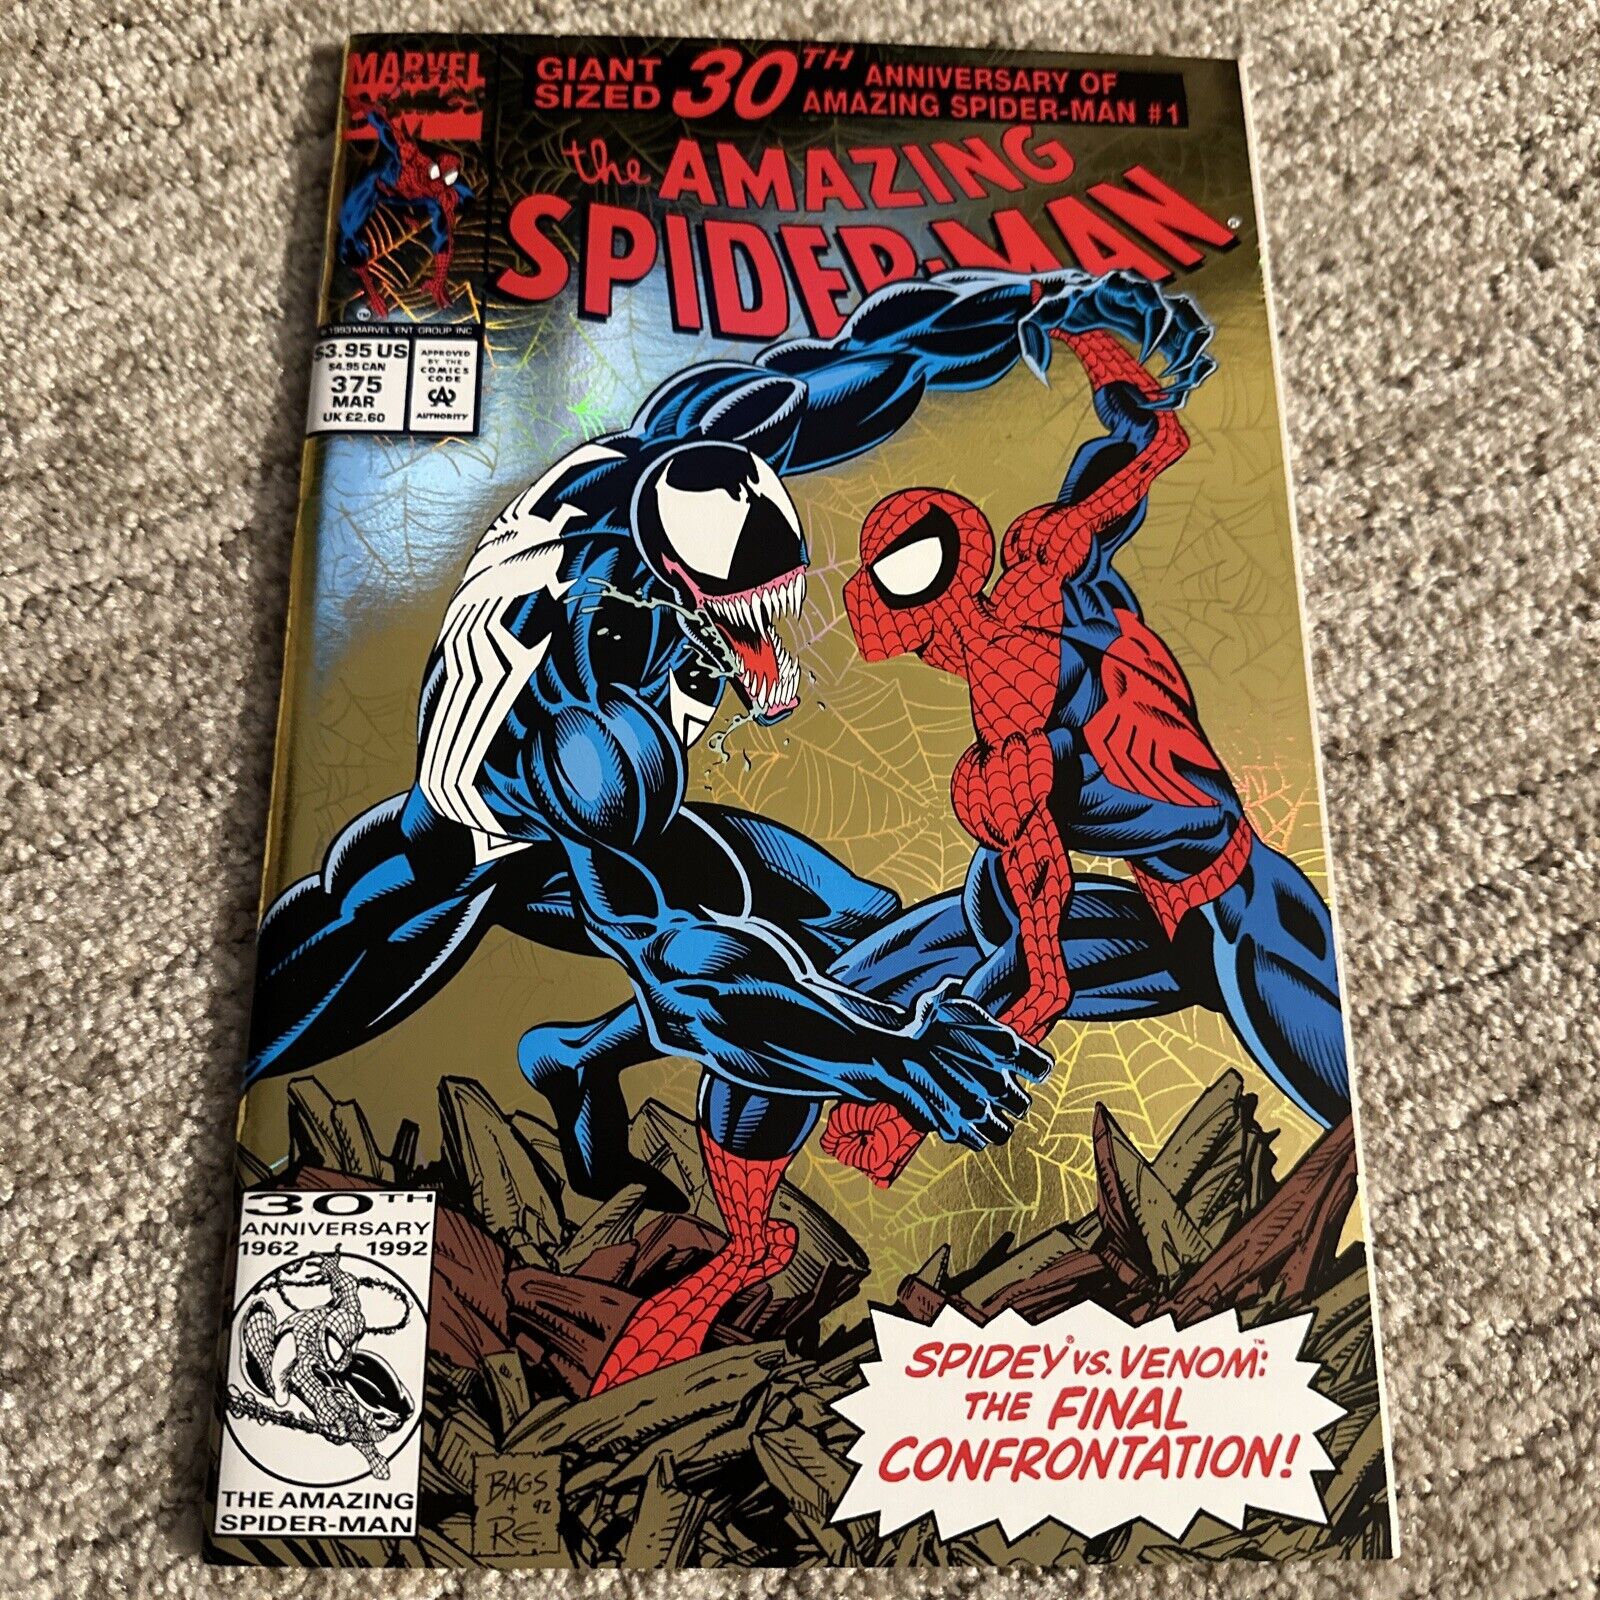 The Amazing Spider-man Comic #375 VF/NM+ 30th Anniversary Key Gold Foil Cover